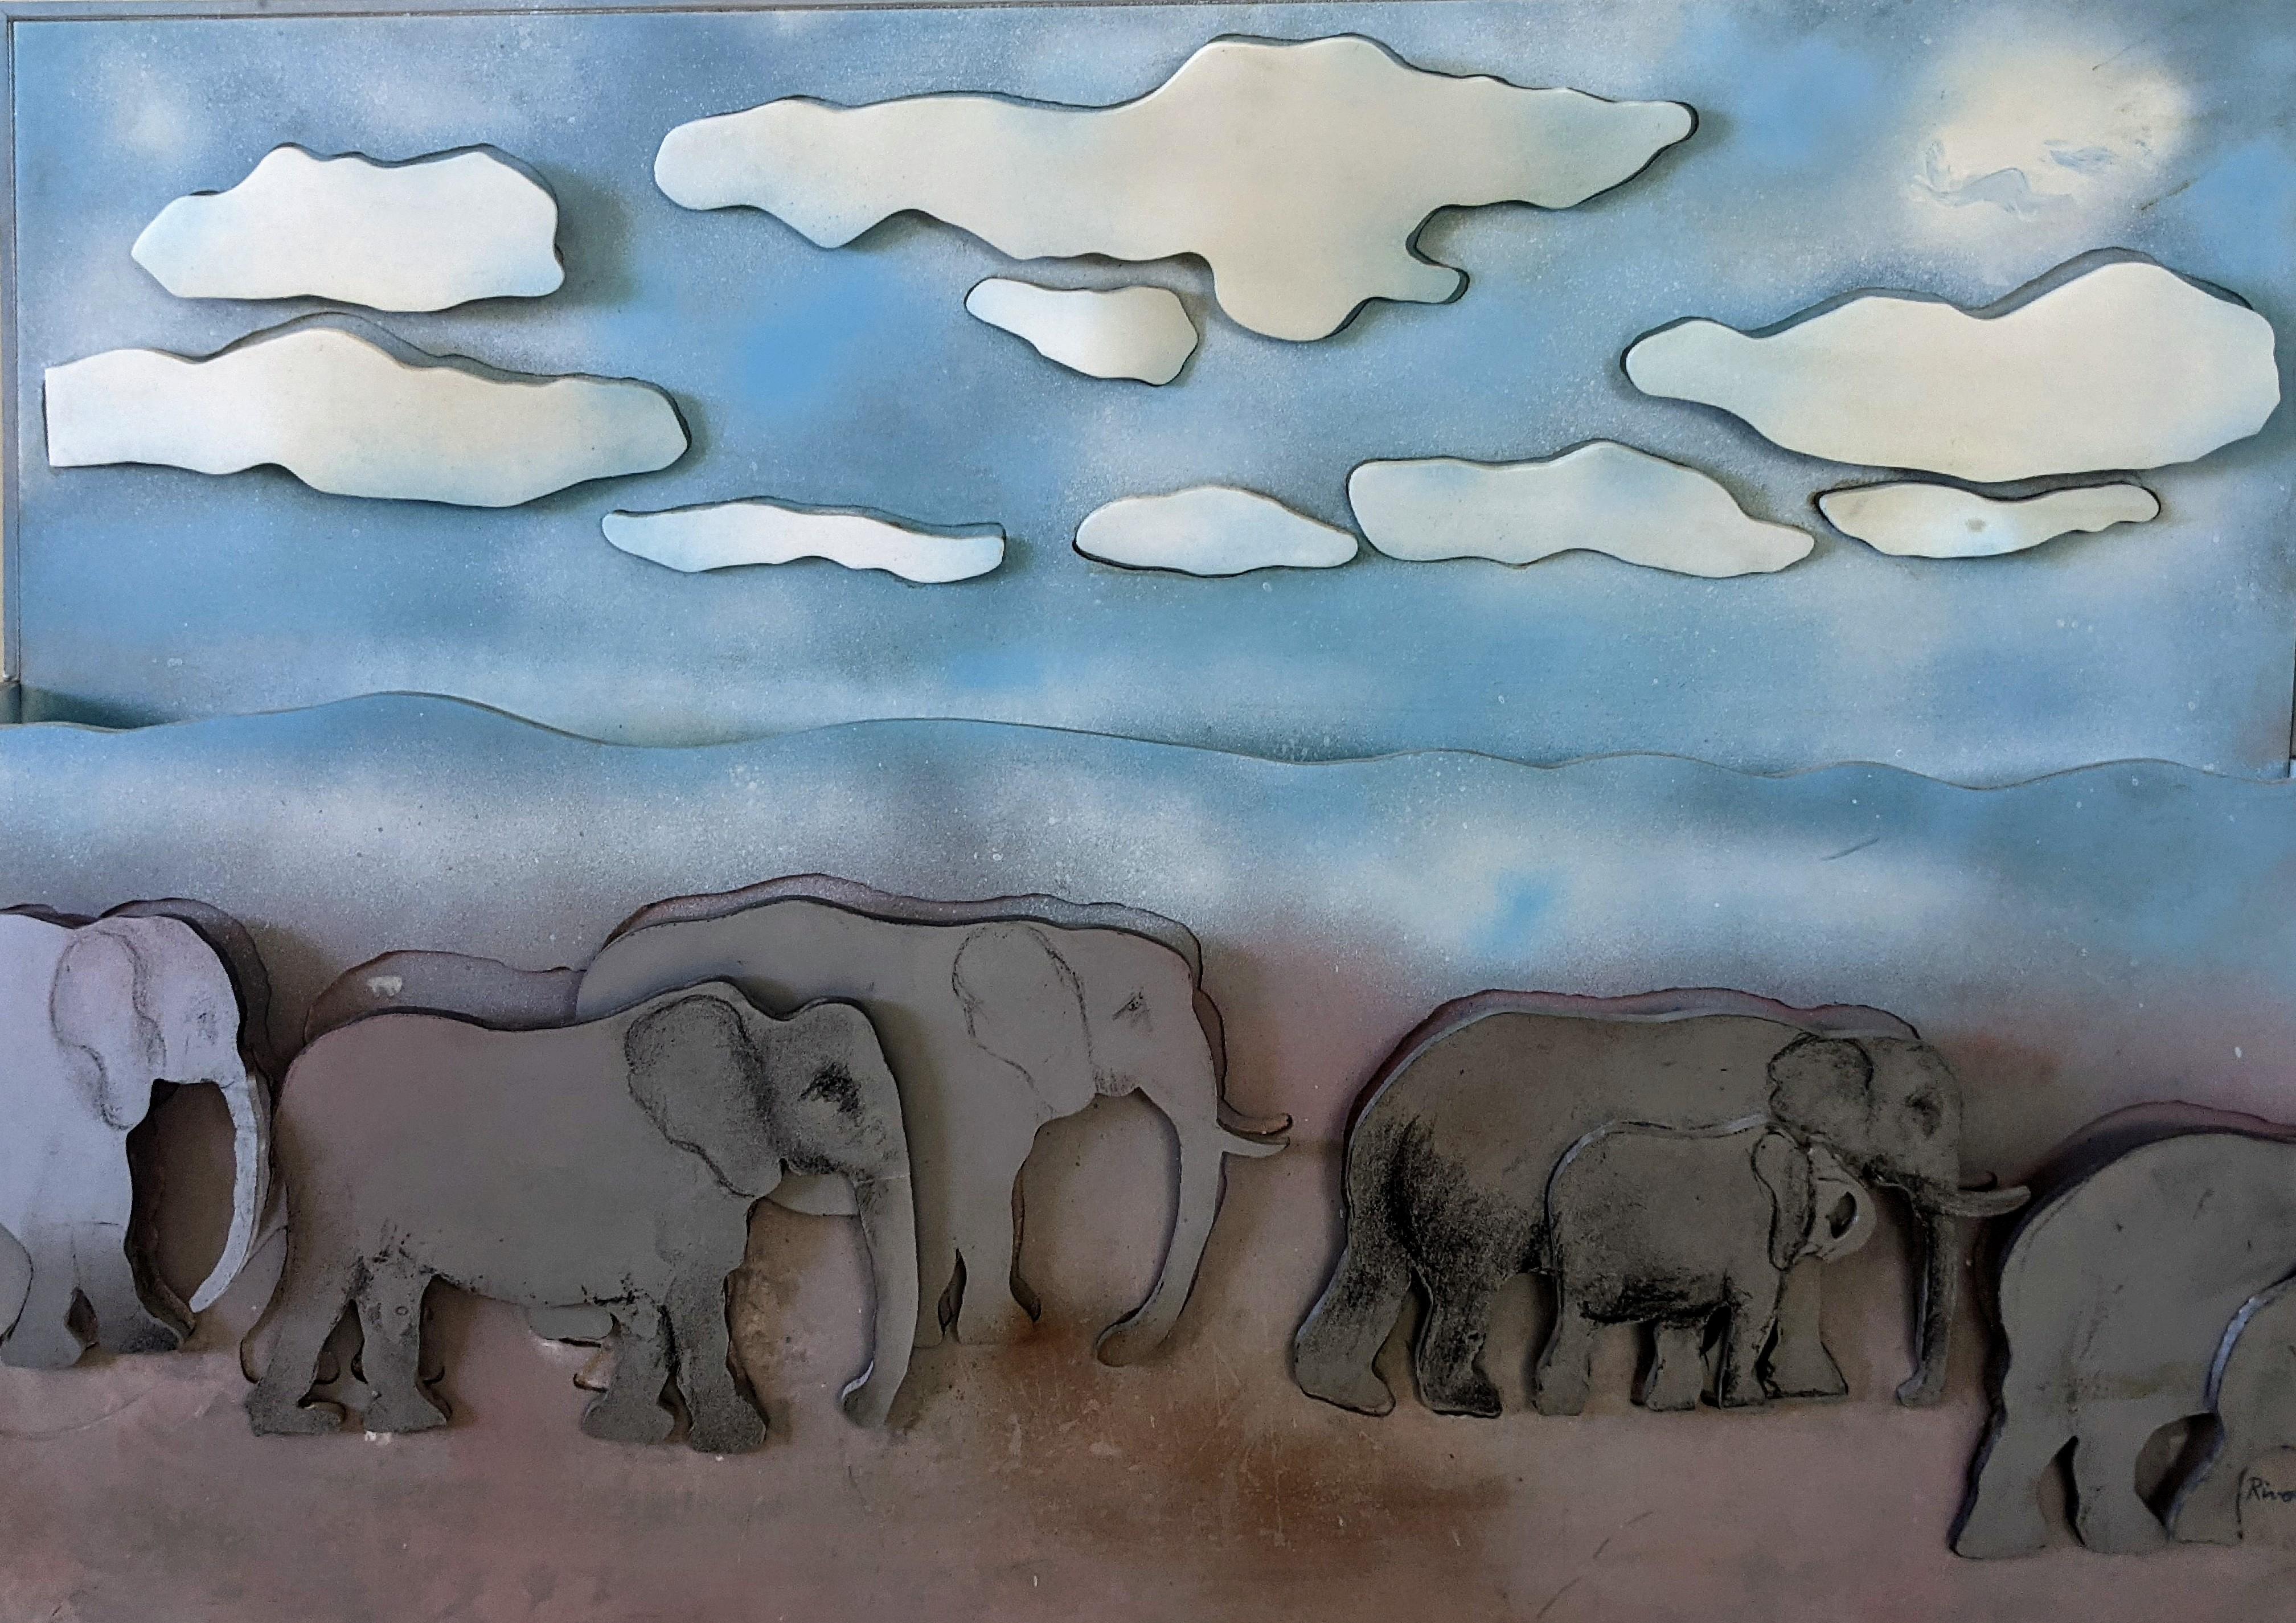 Larry Rivers (1923 - 2002) 
Amboseli Elephants, 1968
Metal with airbrushing, acrylic
26 x 36 x 5 1/4 inches

Figurative artist Larry Rivers was born in the Bronx in 1923 to Ukrainian Jewish parents, and was named Yitzak Loiza Grossberg.  Rivers